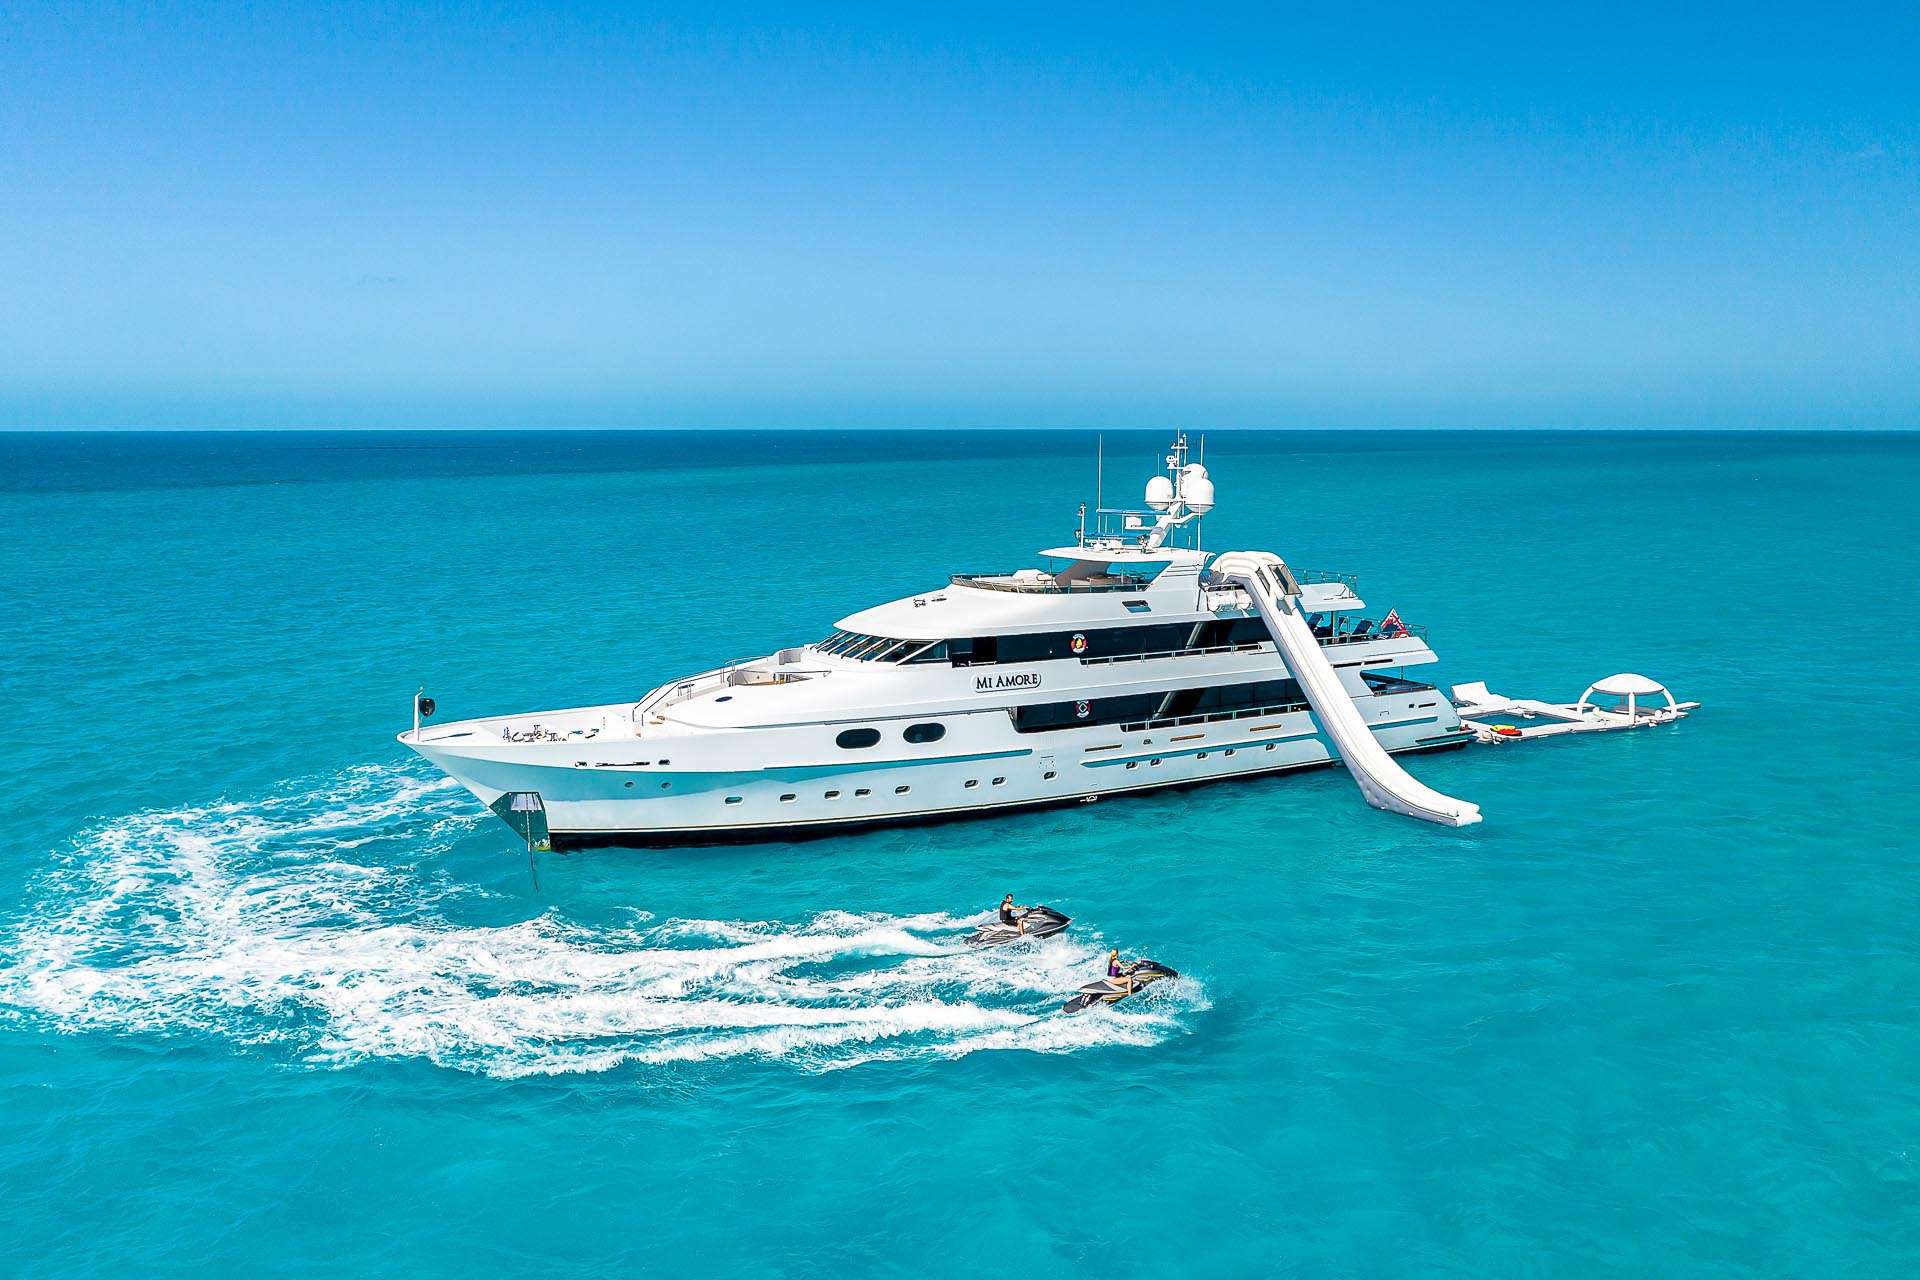 MI AMORE - Yacht Charter Annapolis & Boat hire in US East Coast & Bahamas 1